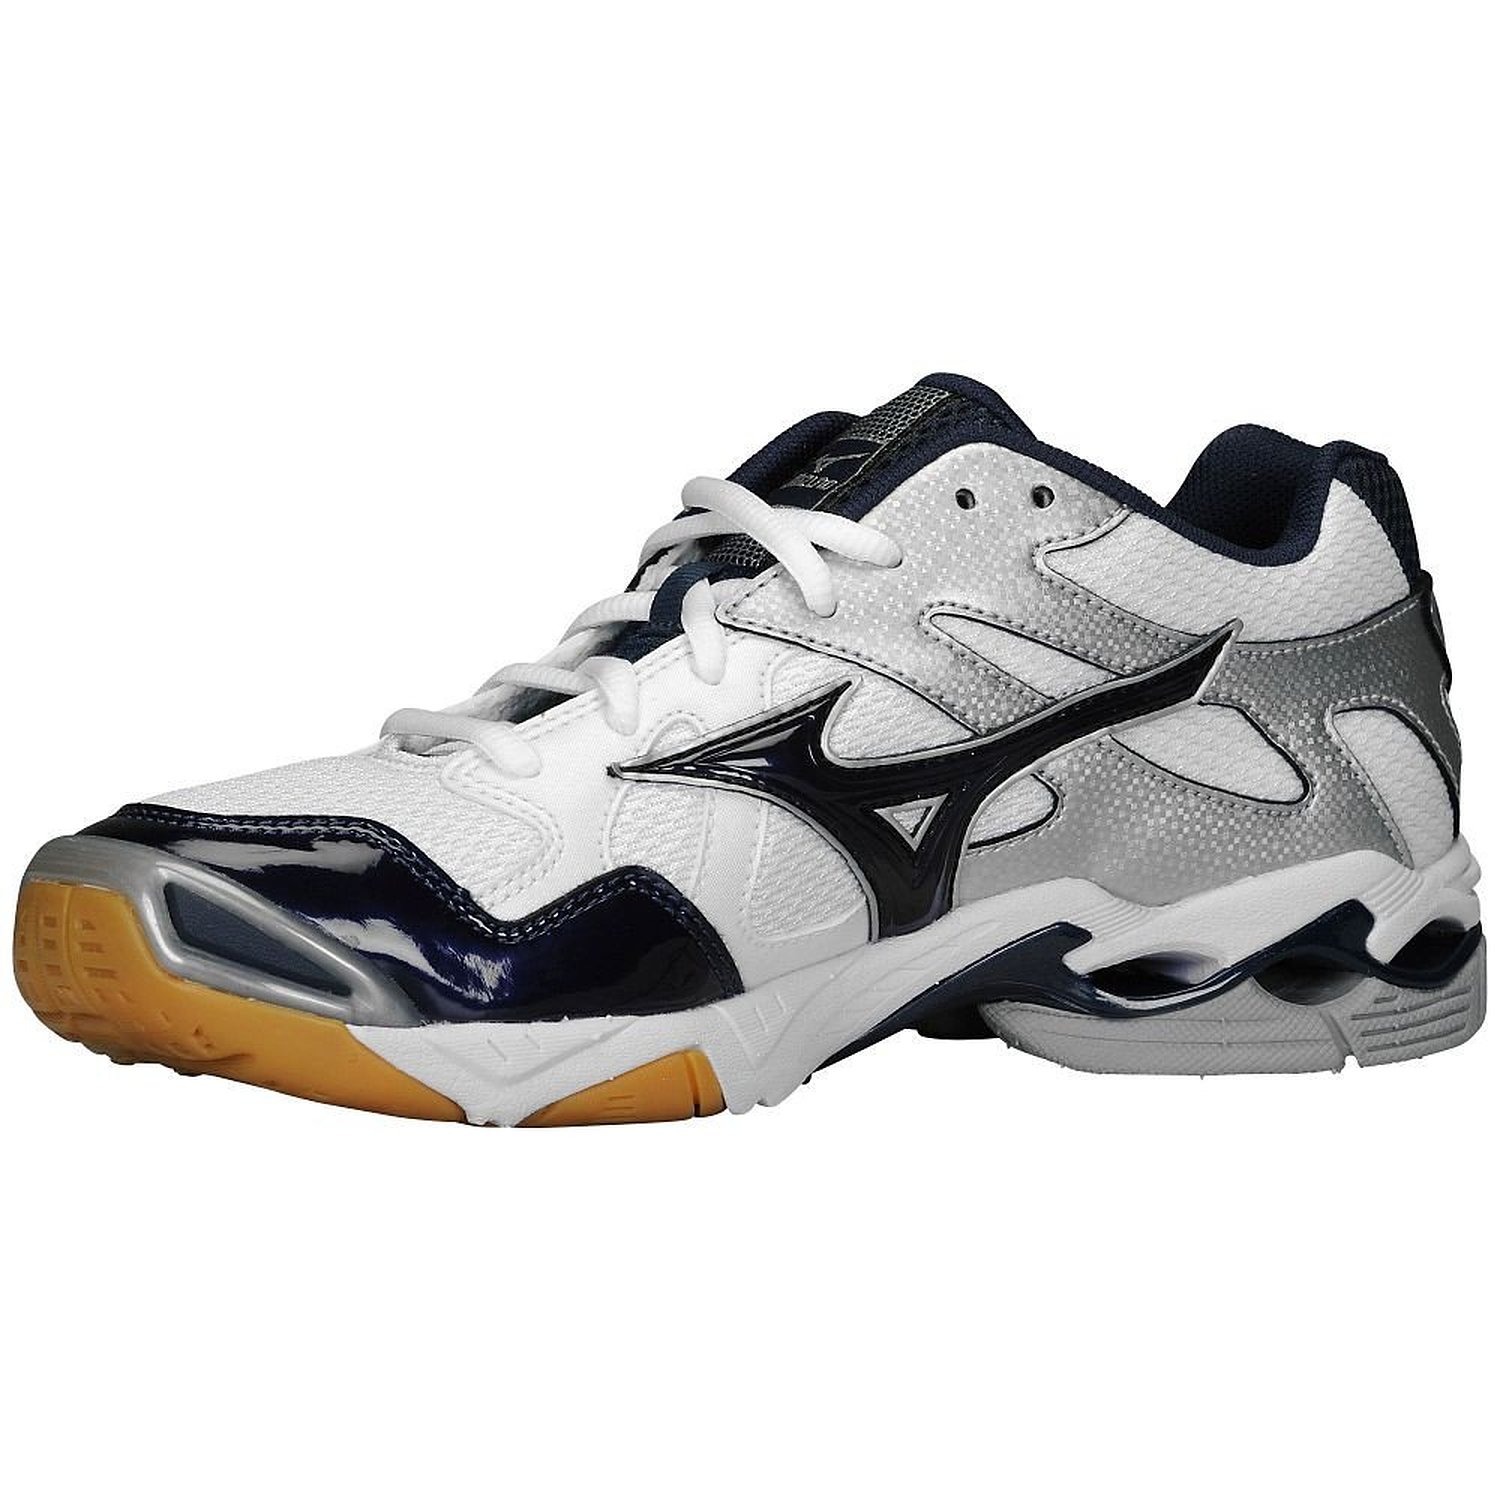 mizuno wave bolt 3 volleyball shoes